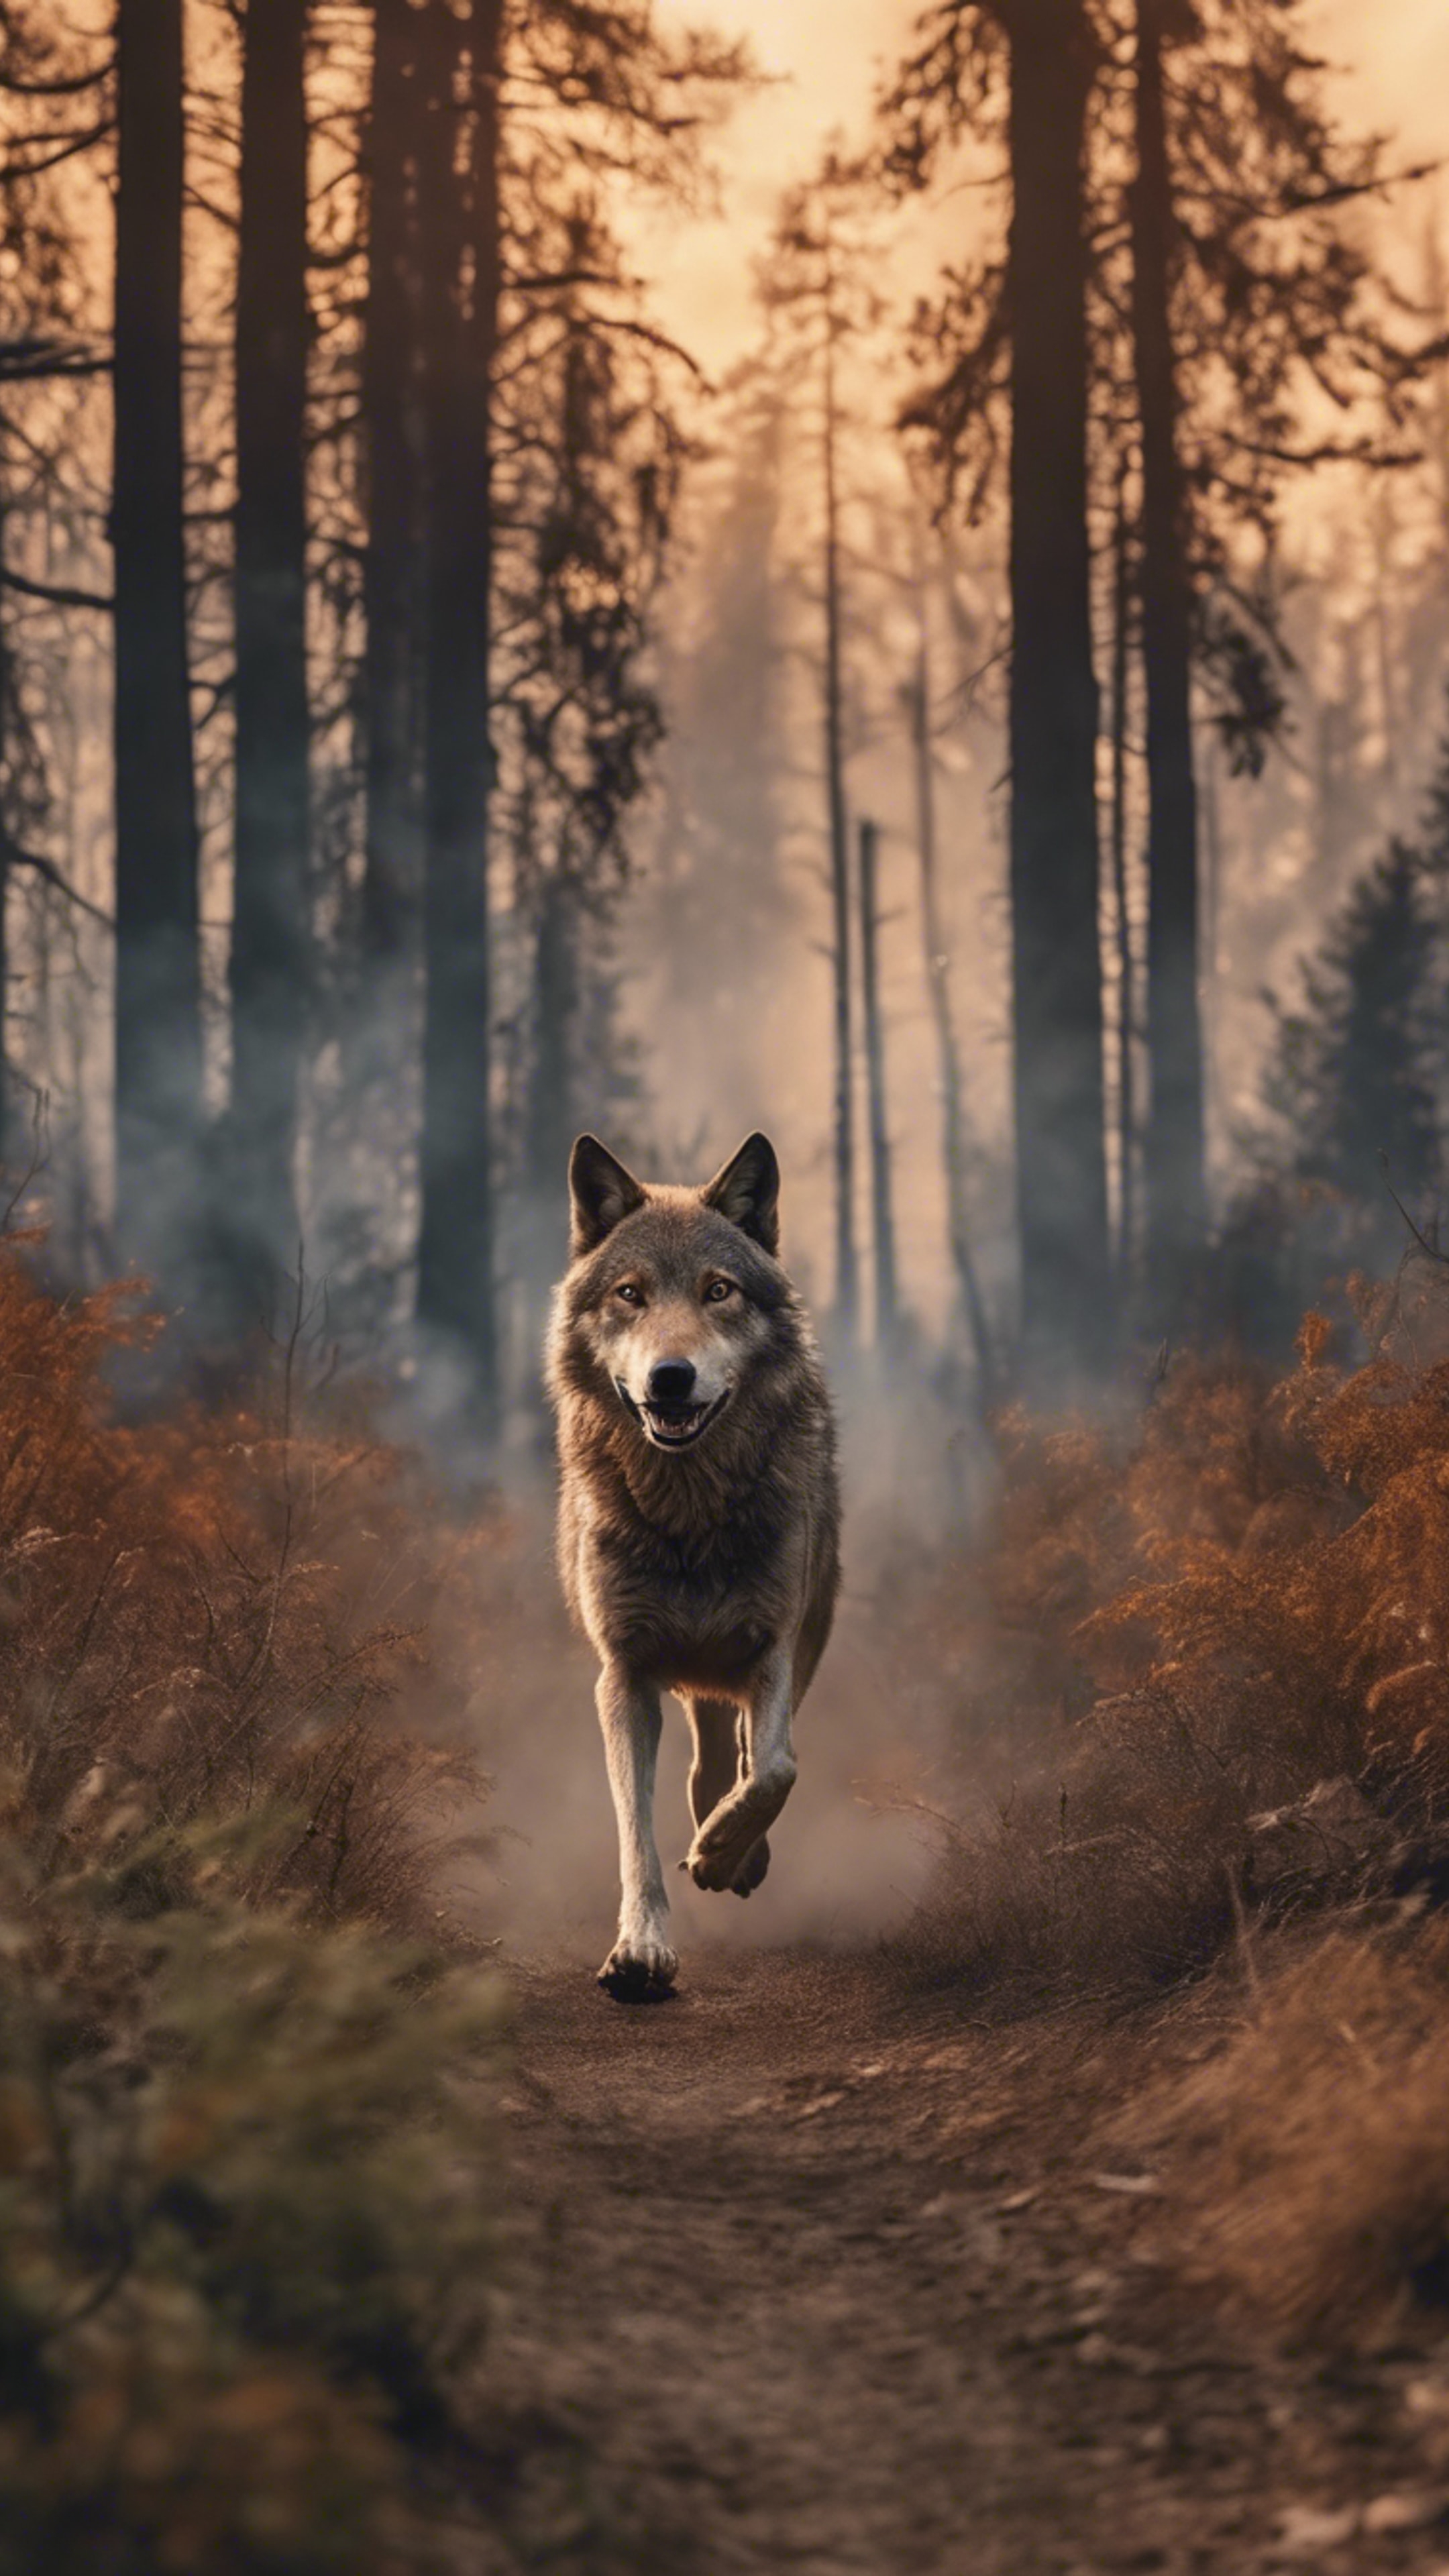 A dramatic panorama scene with a galloping wolf majestically escaping a wildfire in a dense woodland.壁紙[9206e9c429784b60a625]